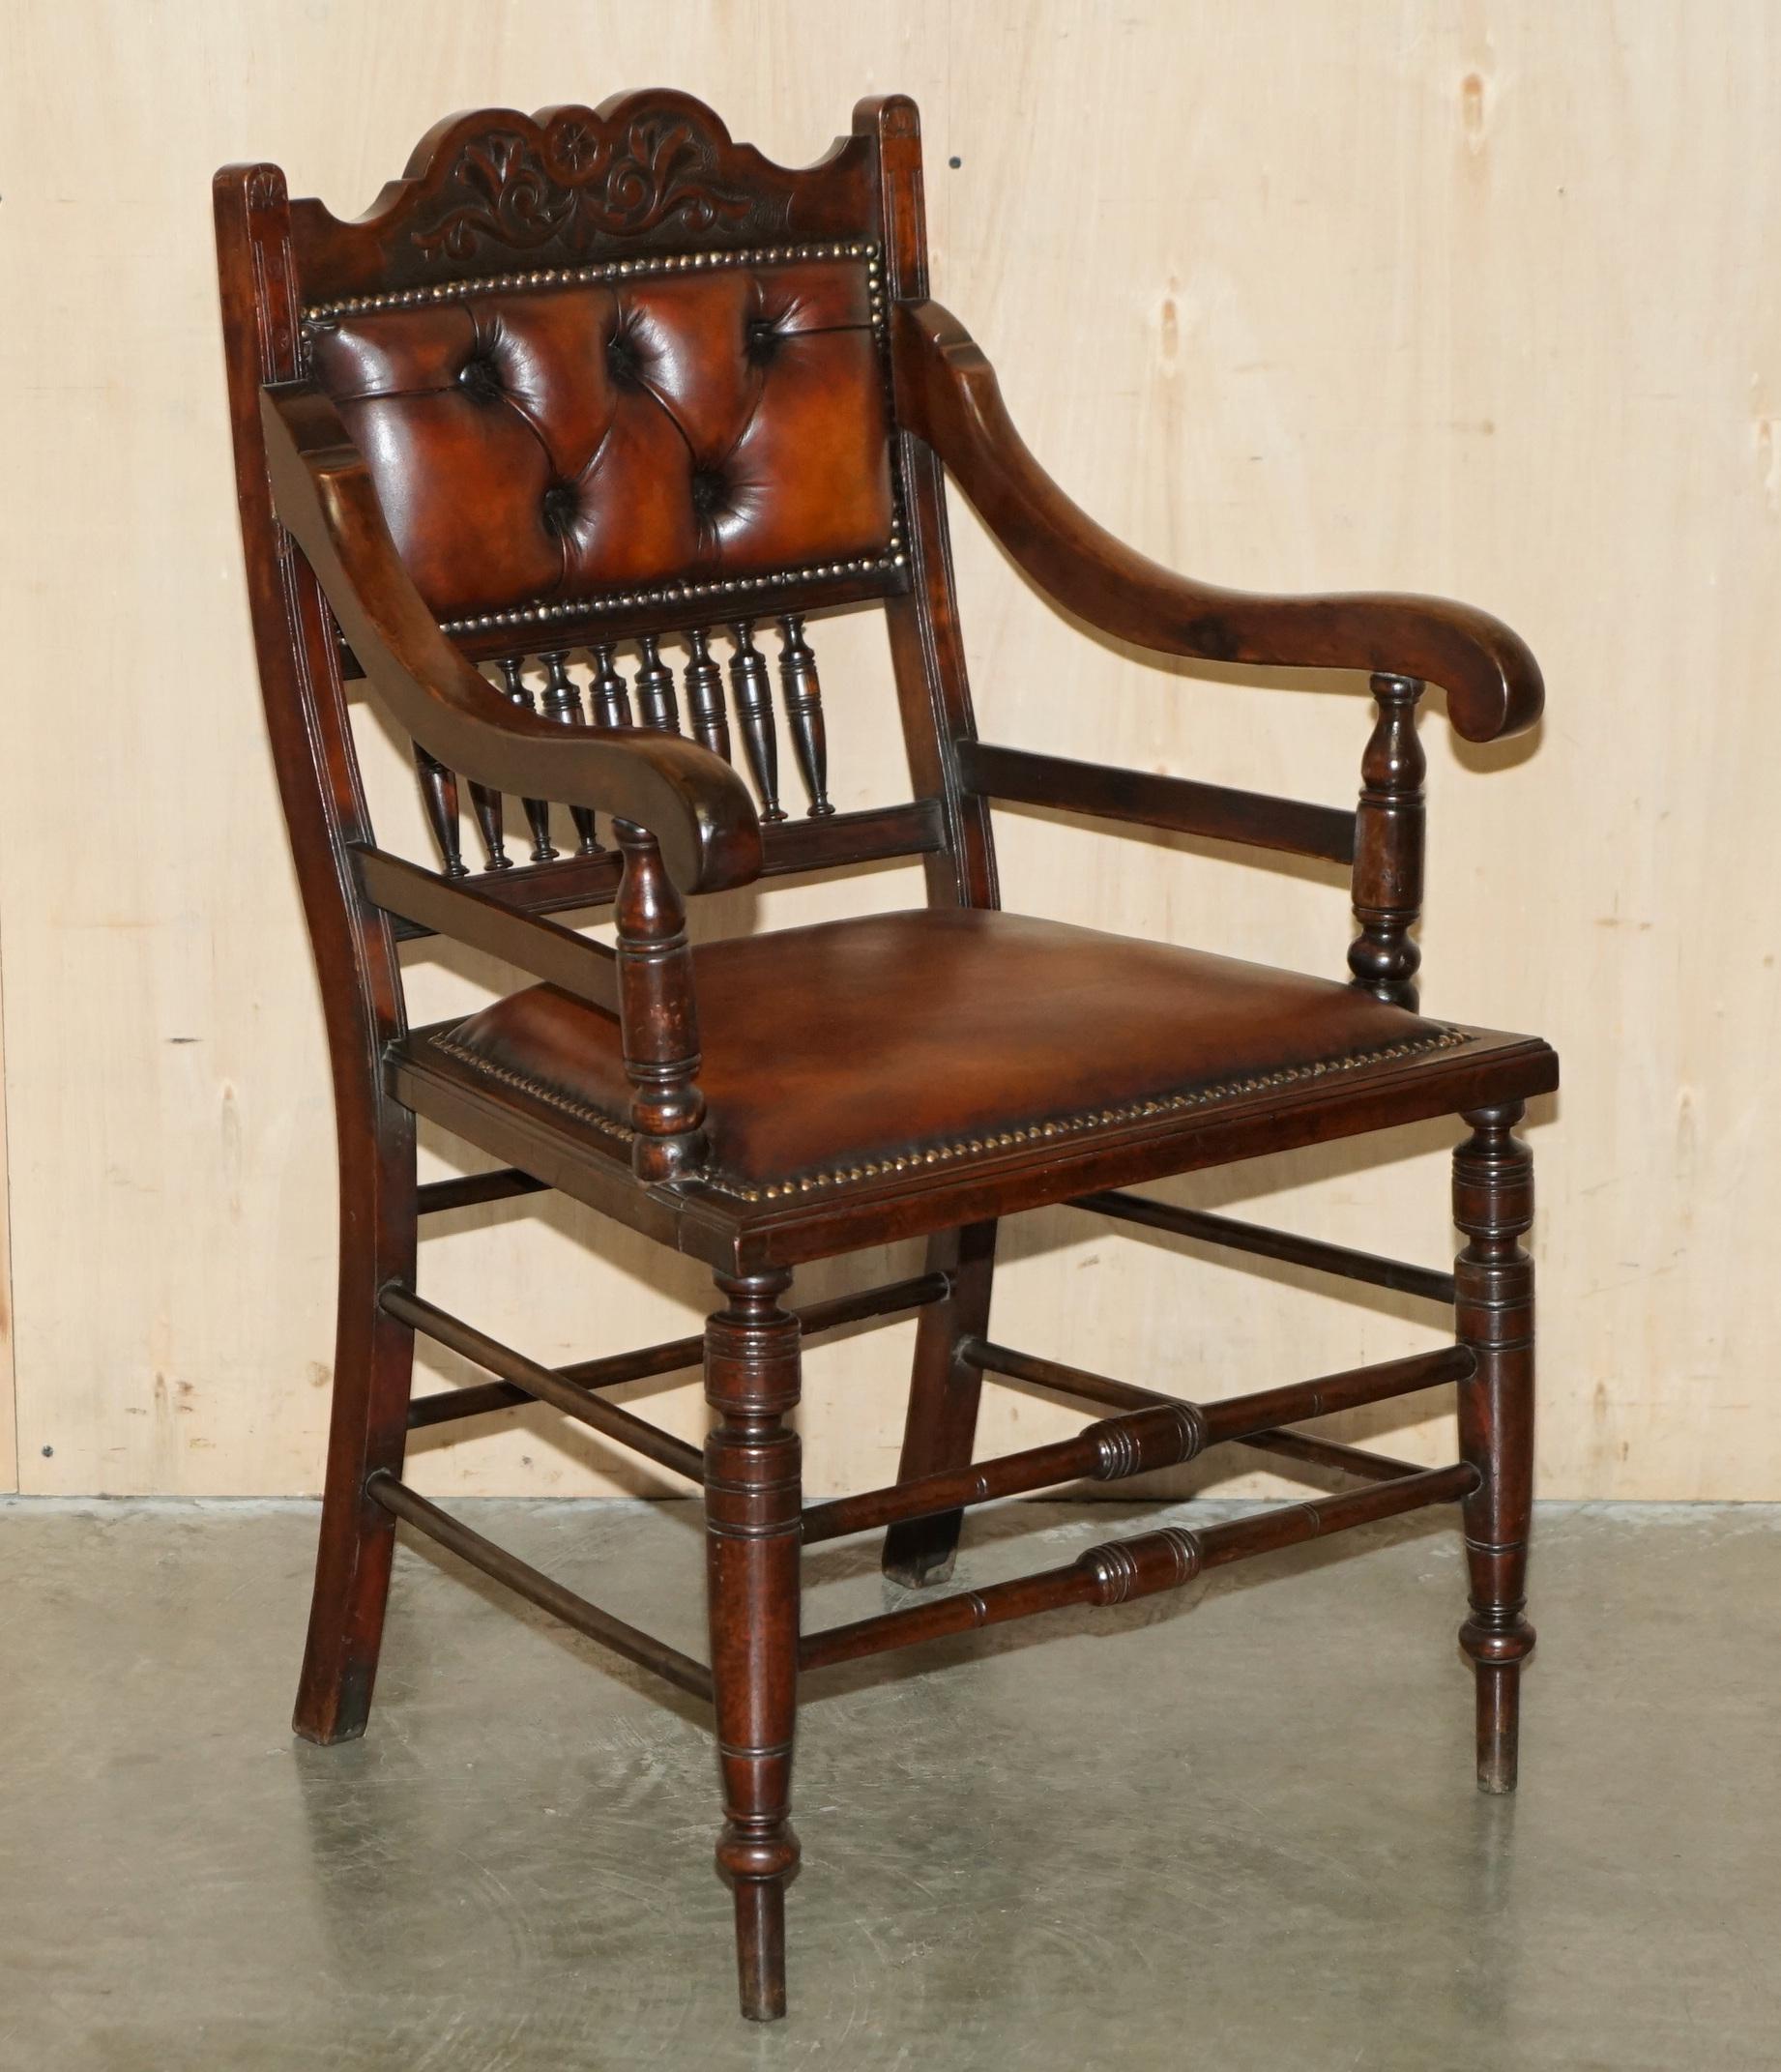 Royal House Antiques

Royal House Antiques is delighted to offer for sale this very rare suite of fully restored late Victorian Chesterfield brown leather dining chairs which come from a gentleman's parlor 

Please note the delivery fee listed is